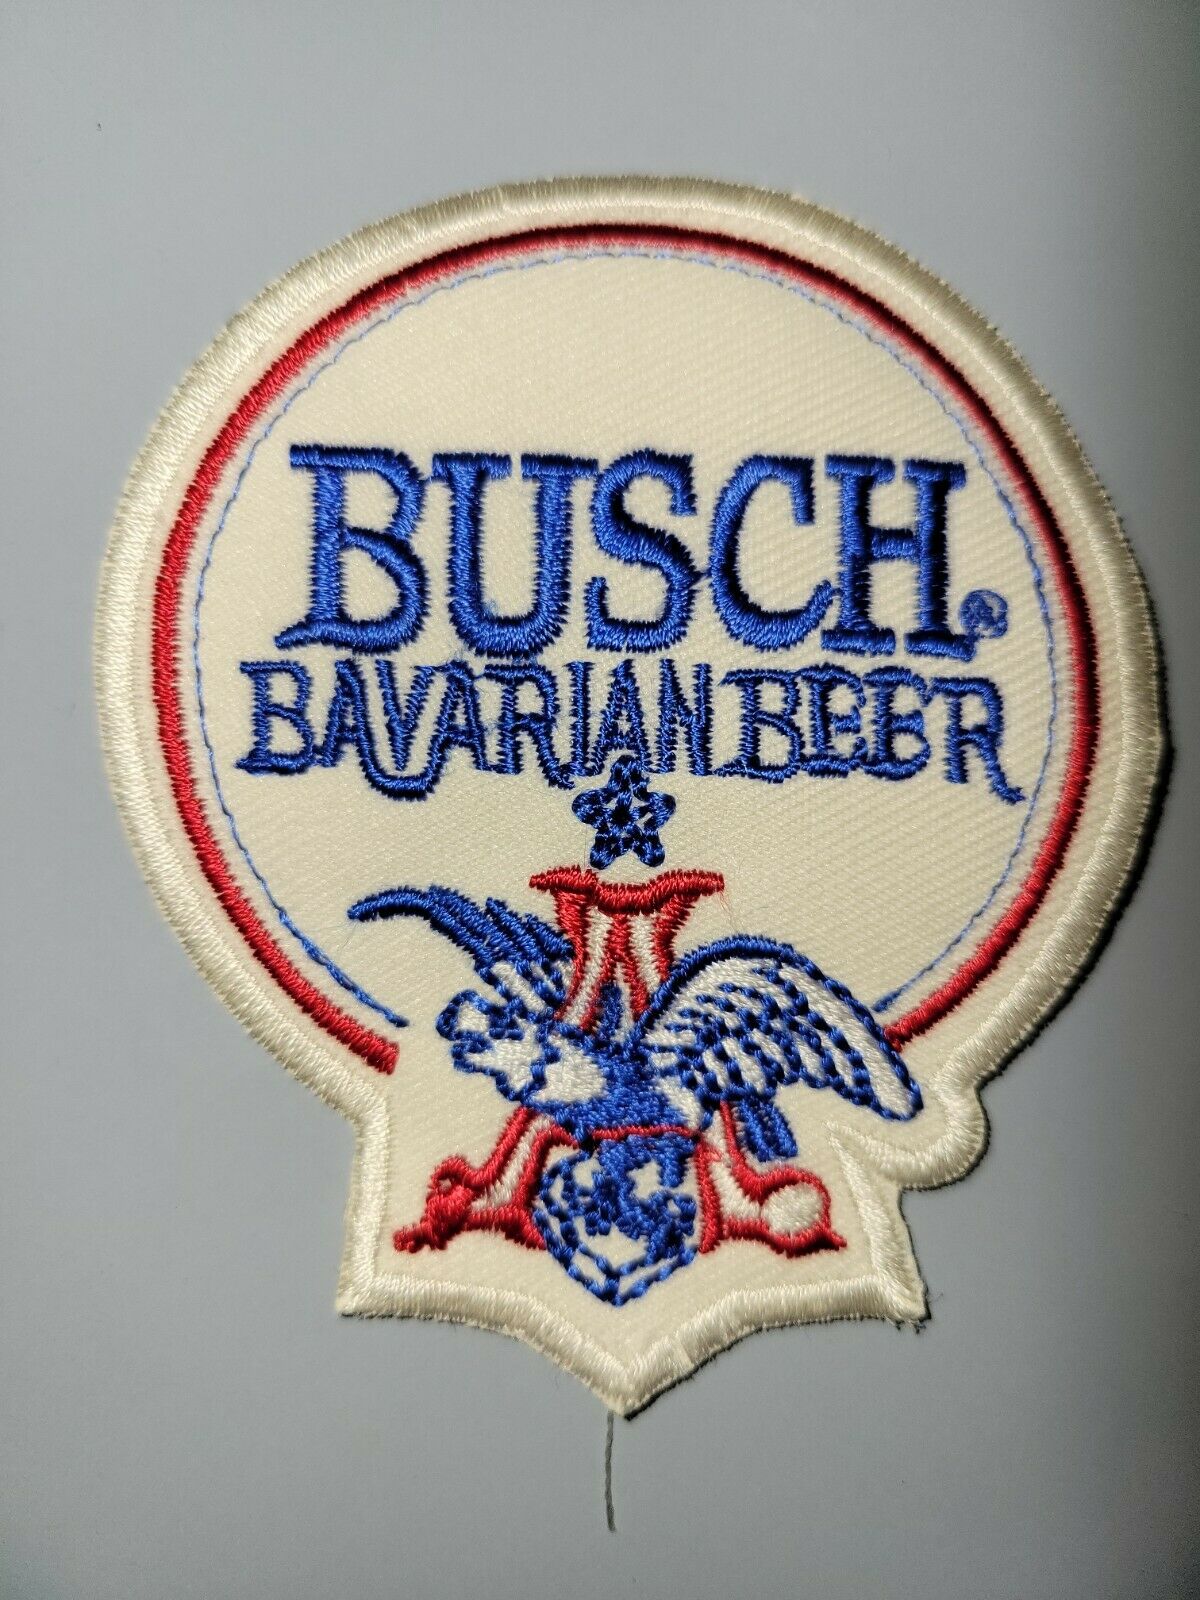 BUSCH BAVARIAN  BEER VINTAGE  Embroidered 3 x 3 Iron On Patch